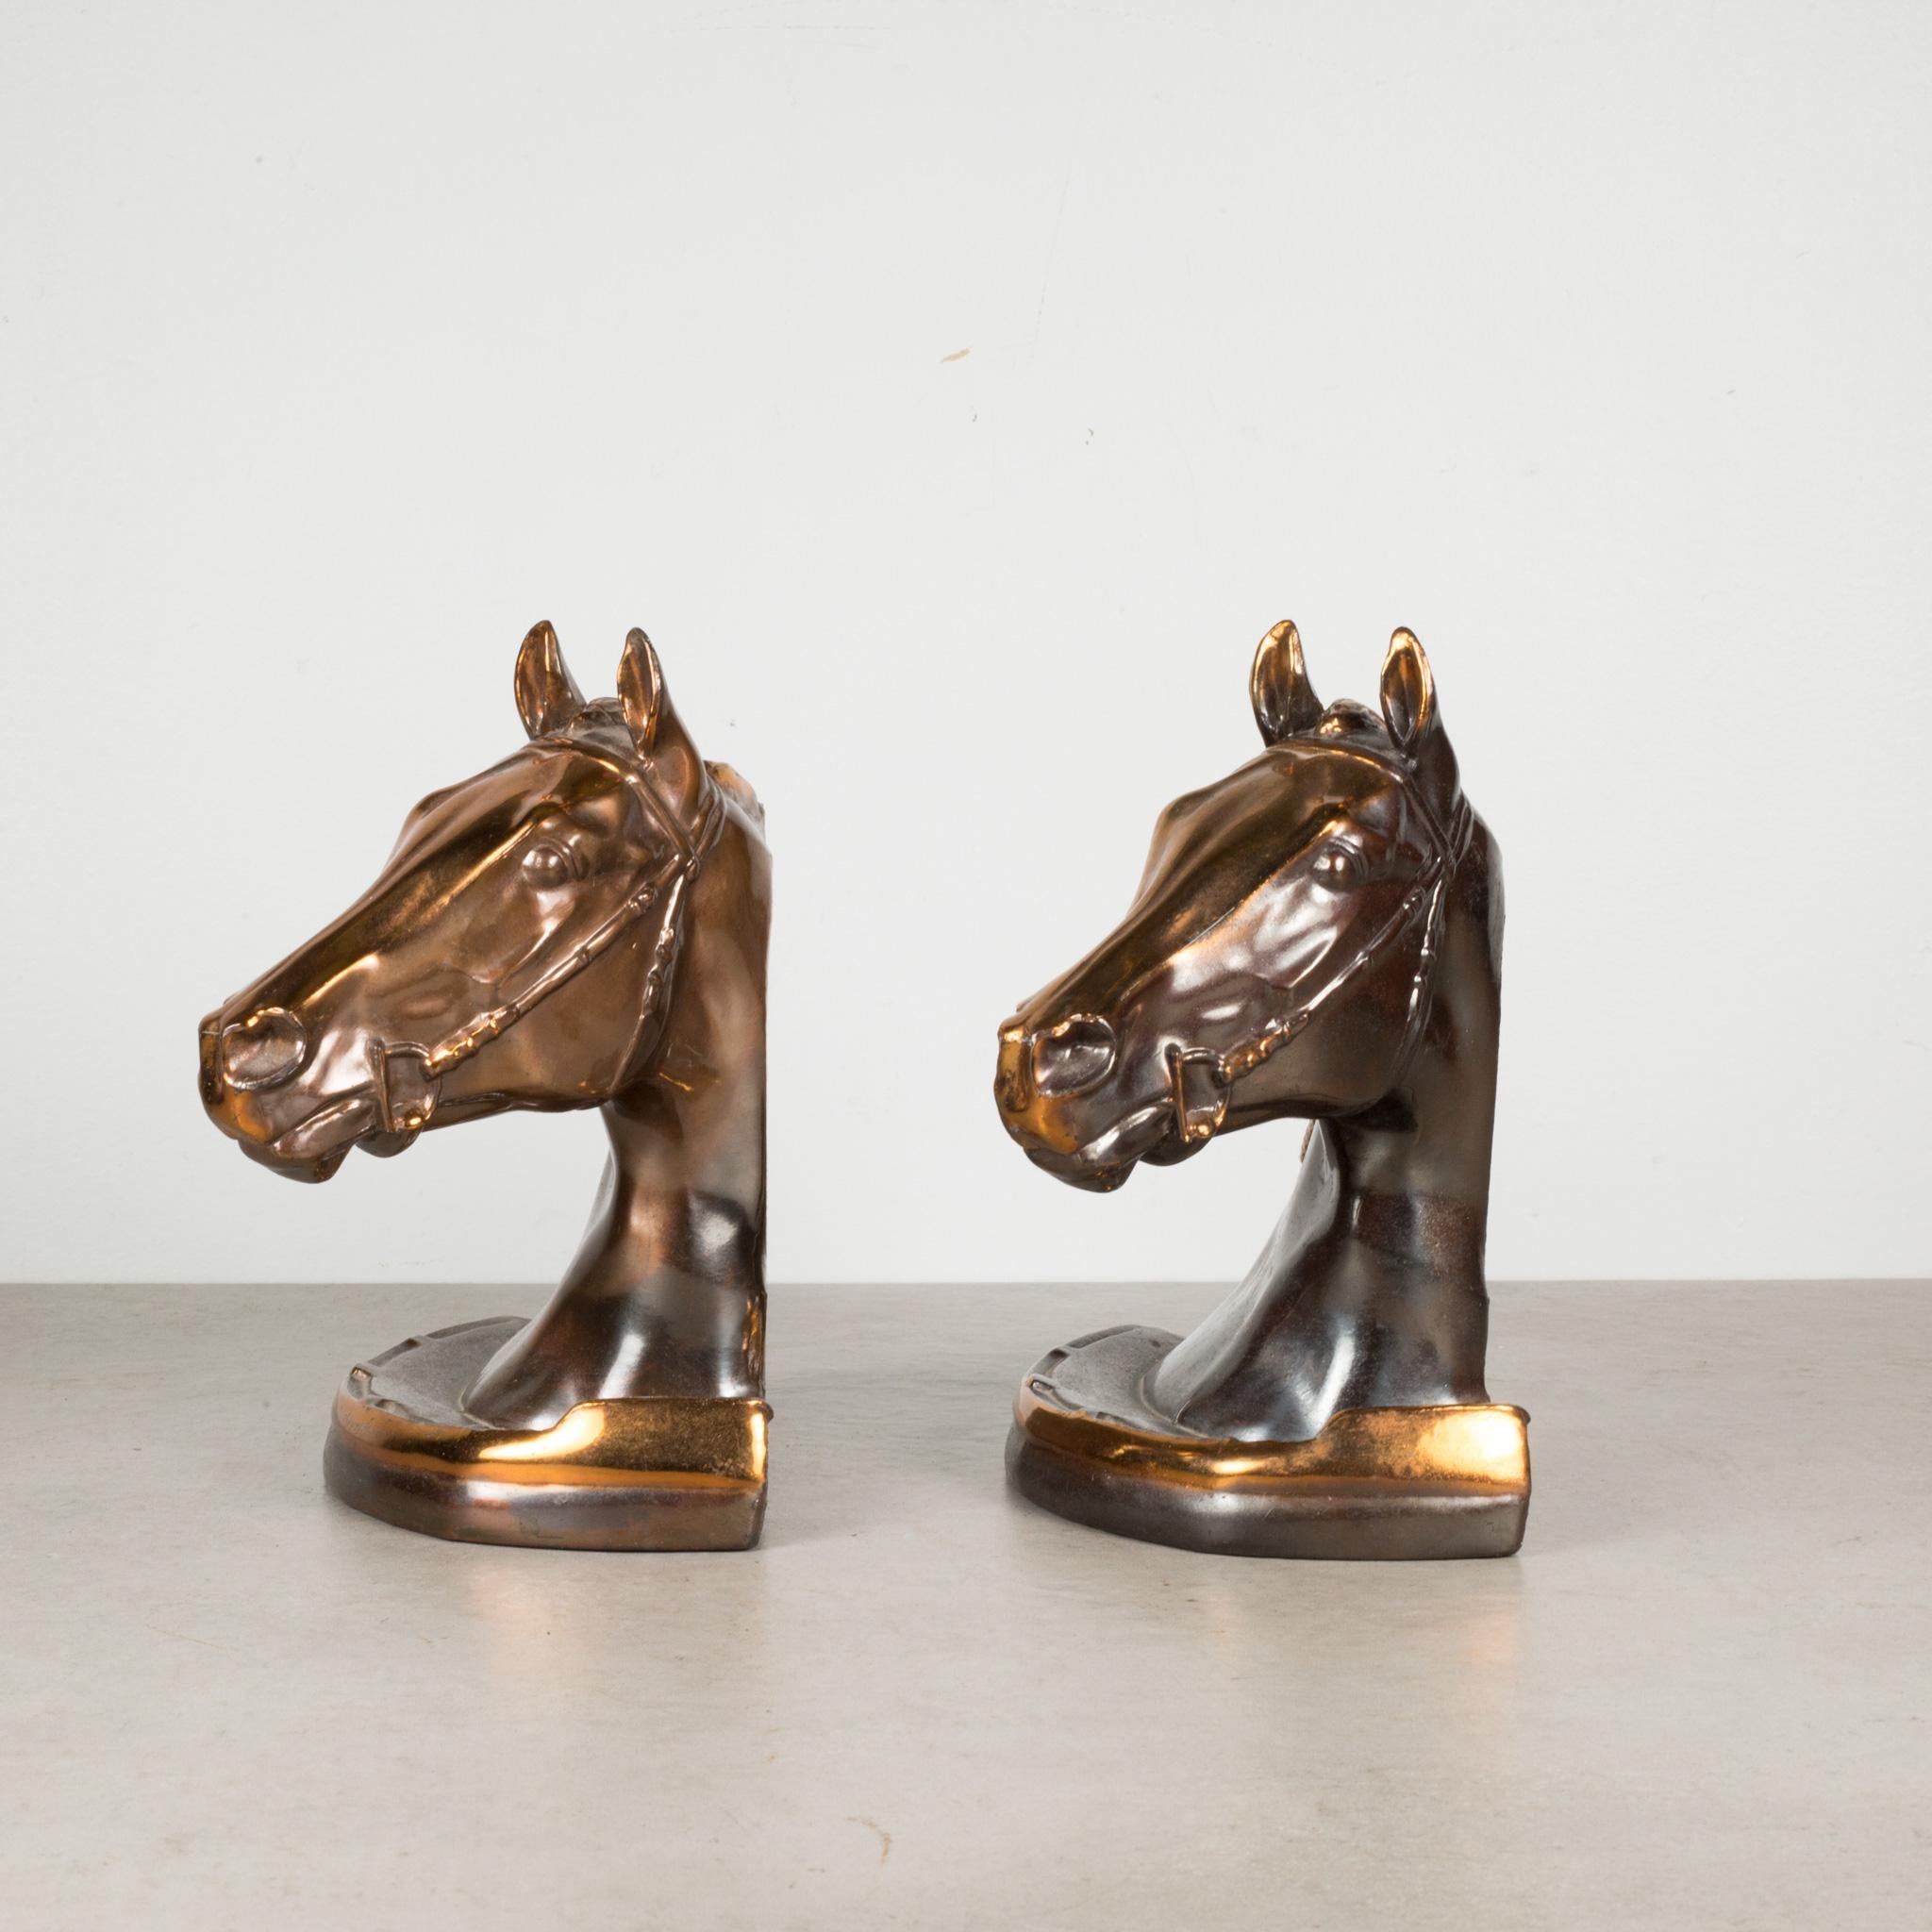 Art Deco Bronze Plated Horse Head Bookends by Glady's Brown and Dodge, c.1946